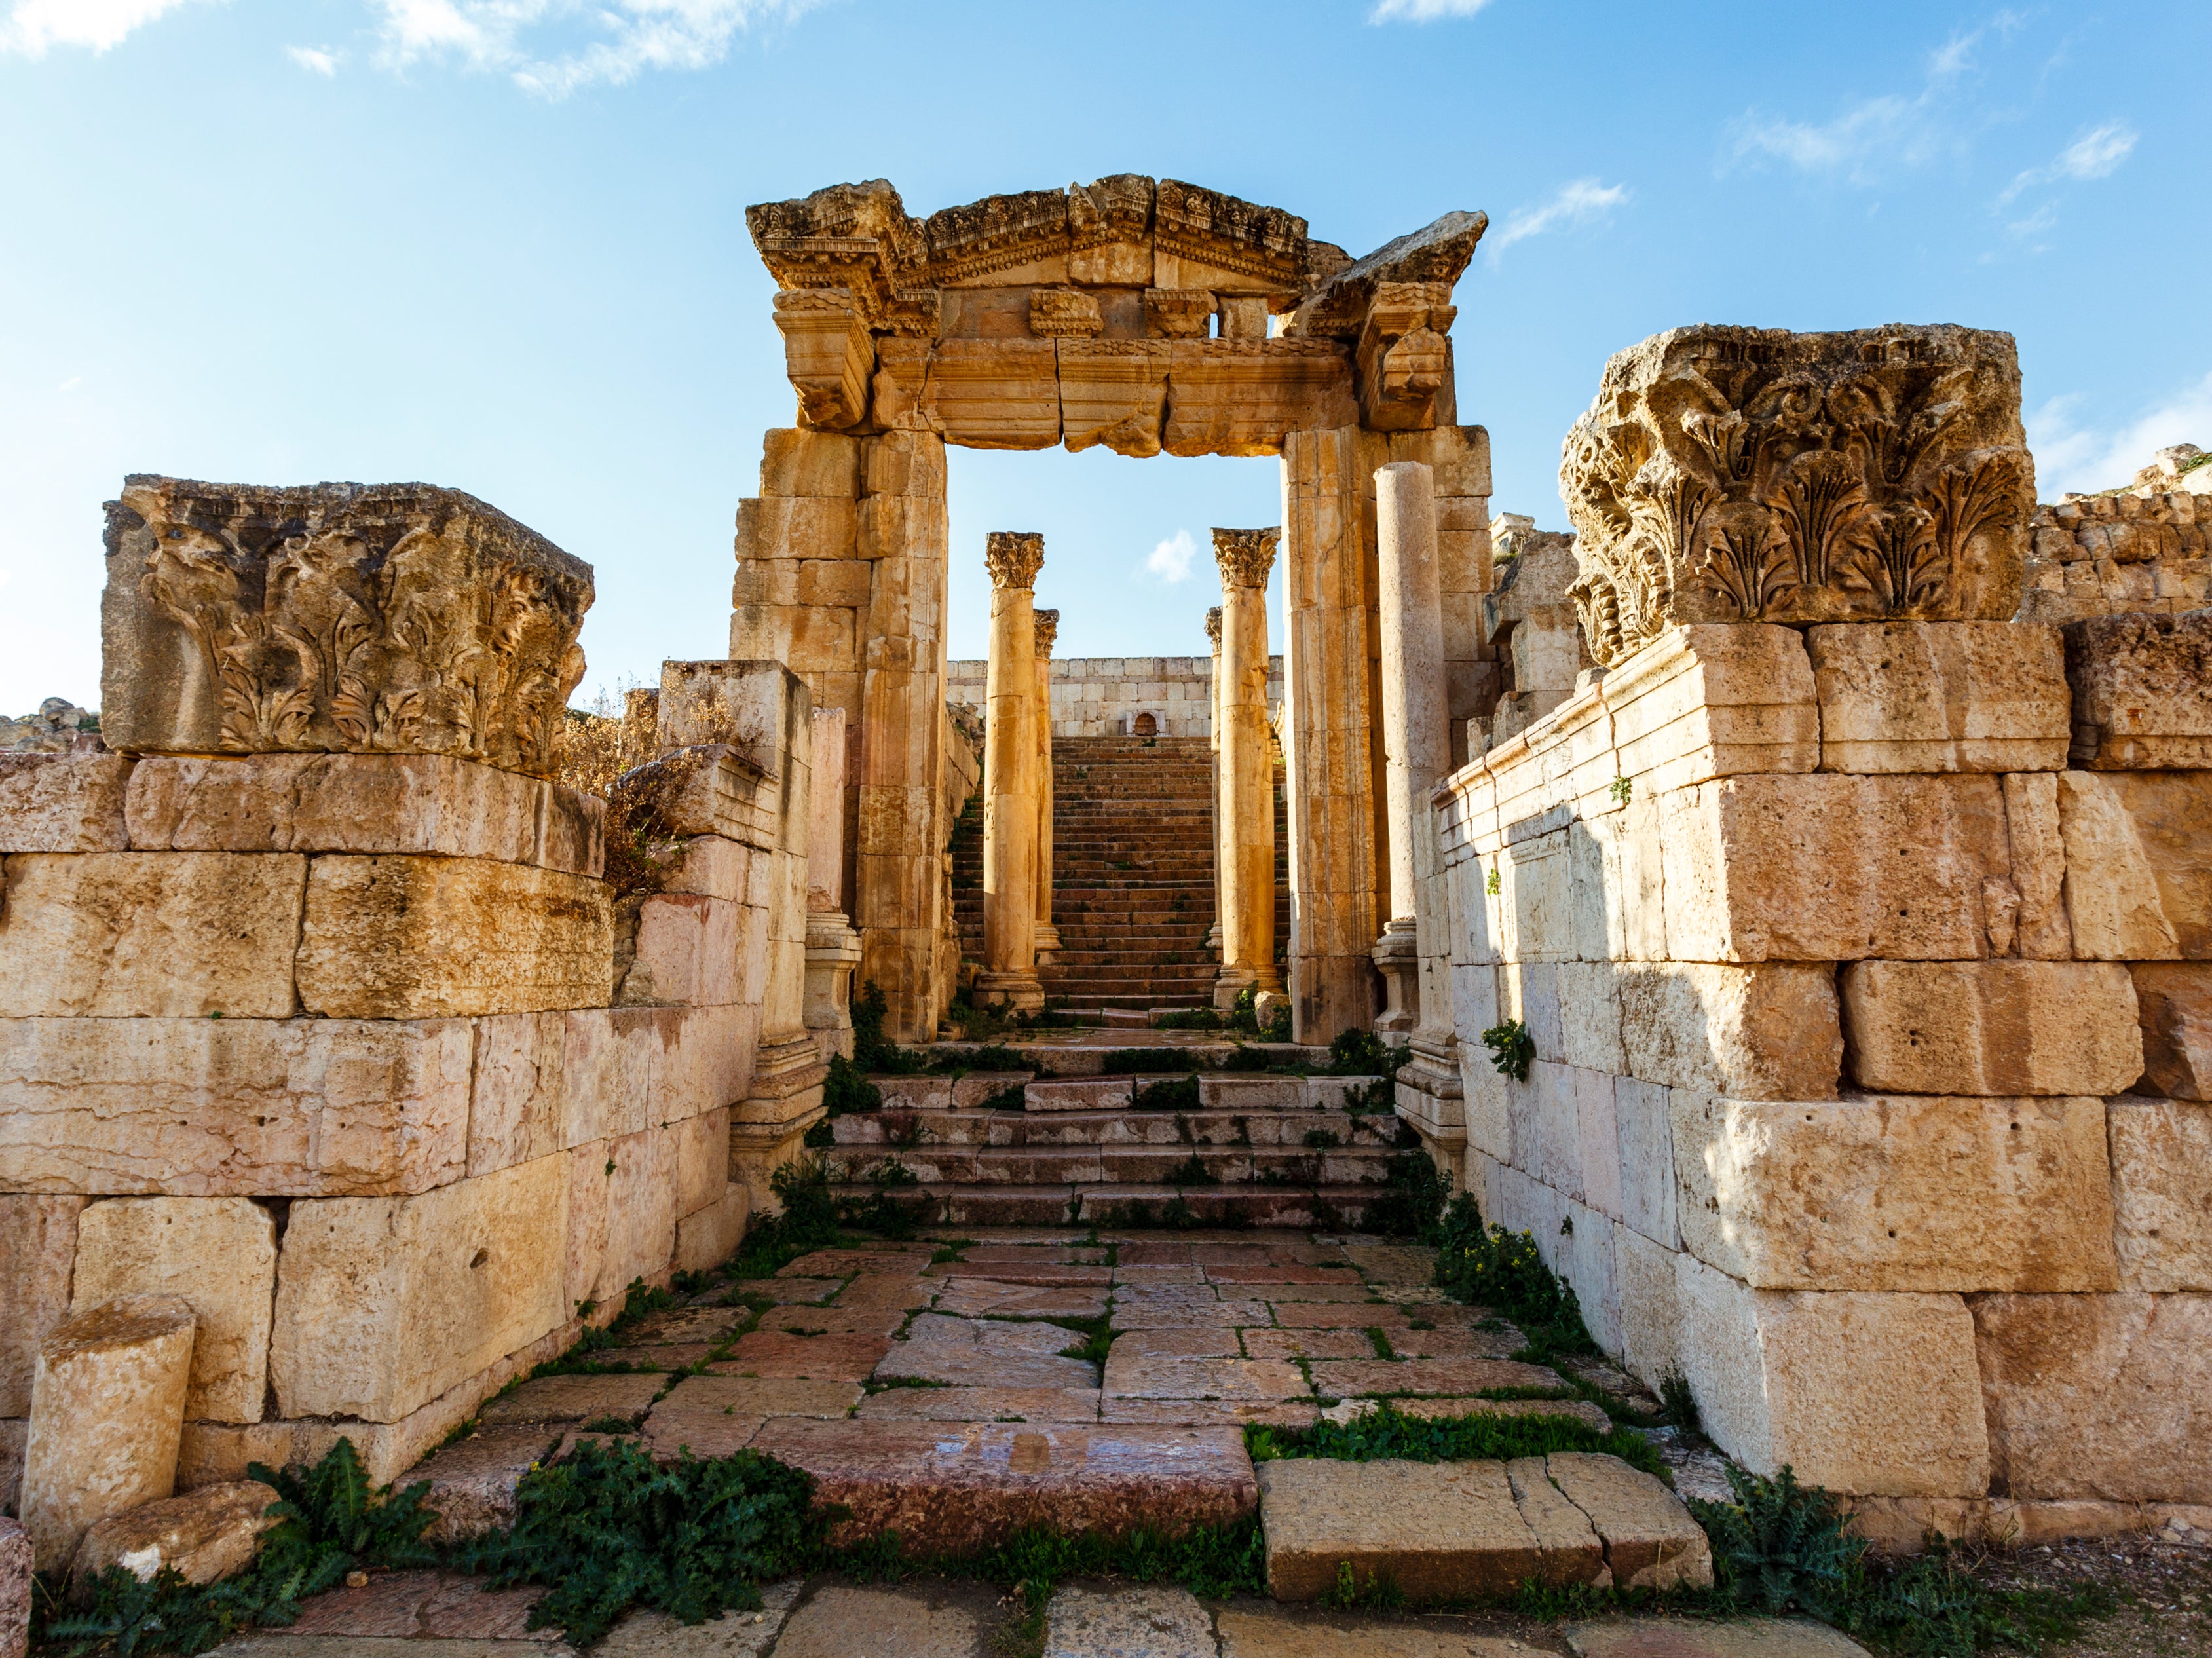 This ancient site includes Hadrian’s Arch and the Temple of Zeus